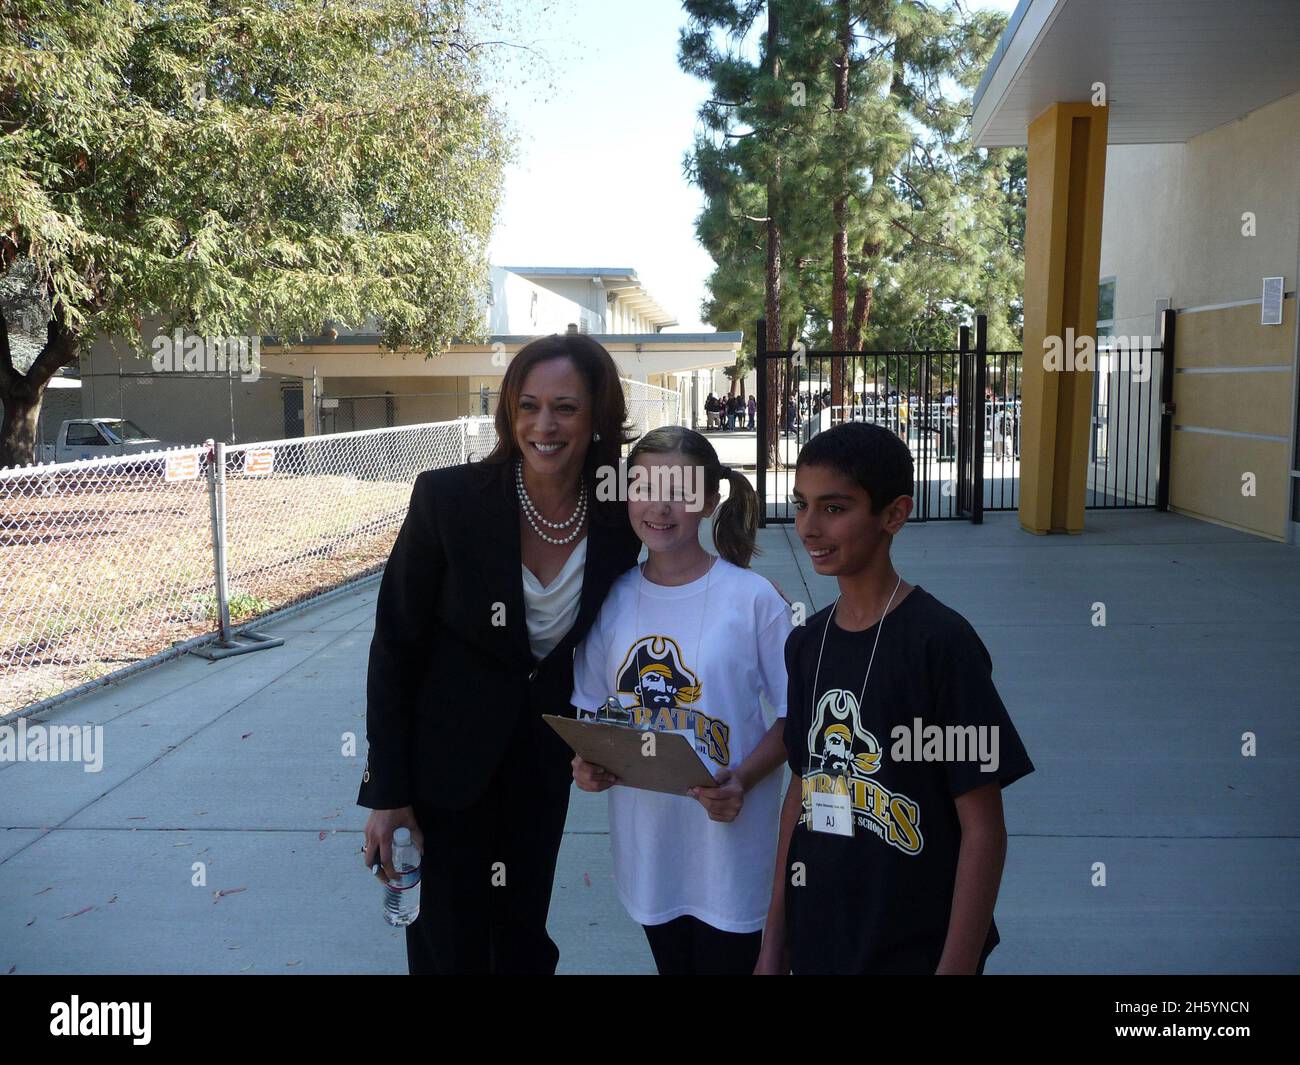 Attorney General Kamala Harris visits Peterson Middle School to meet with students, and a Digital Literacy Team. Sunnyvale - October 28, 2011 Stock Photo